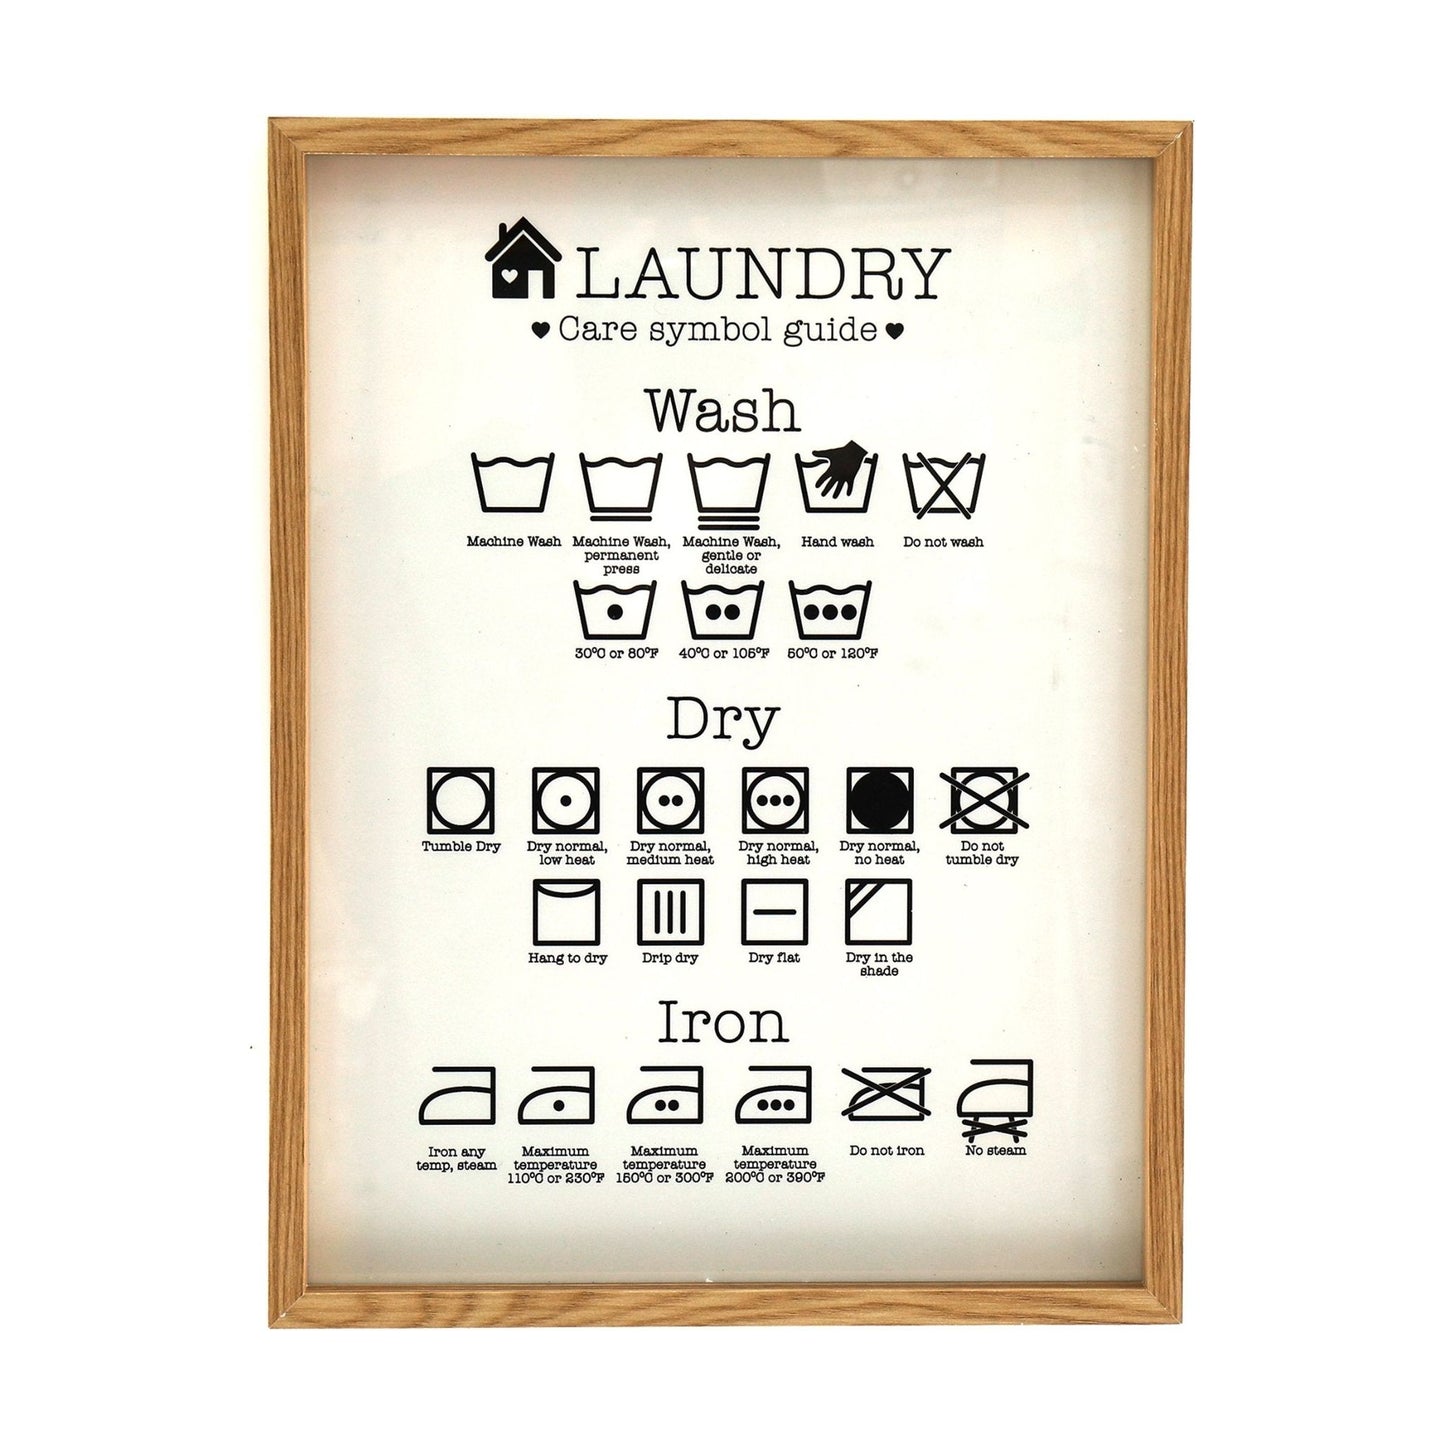 Laundry Care Symbol Guide in Frame - Ashton and Finch